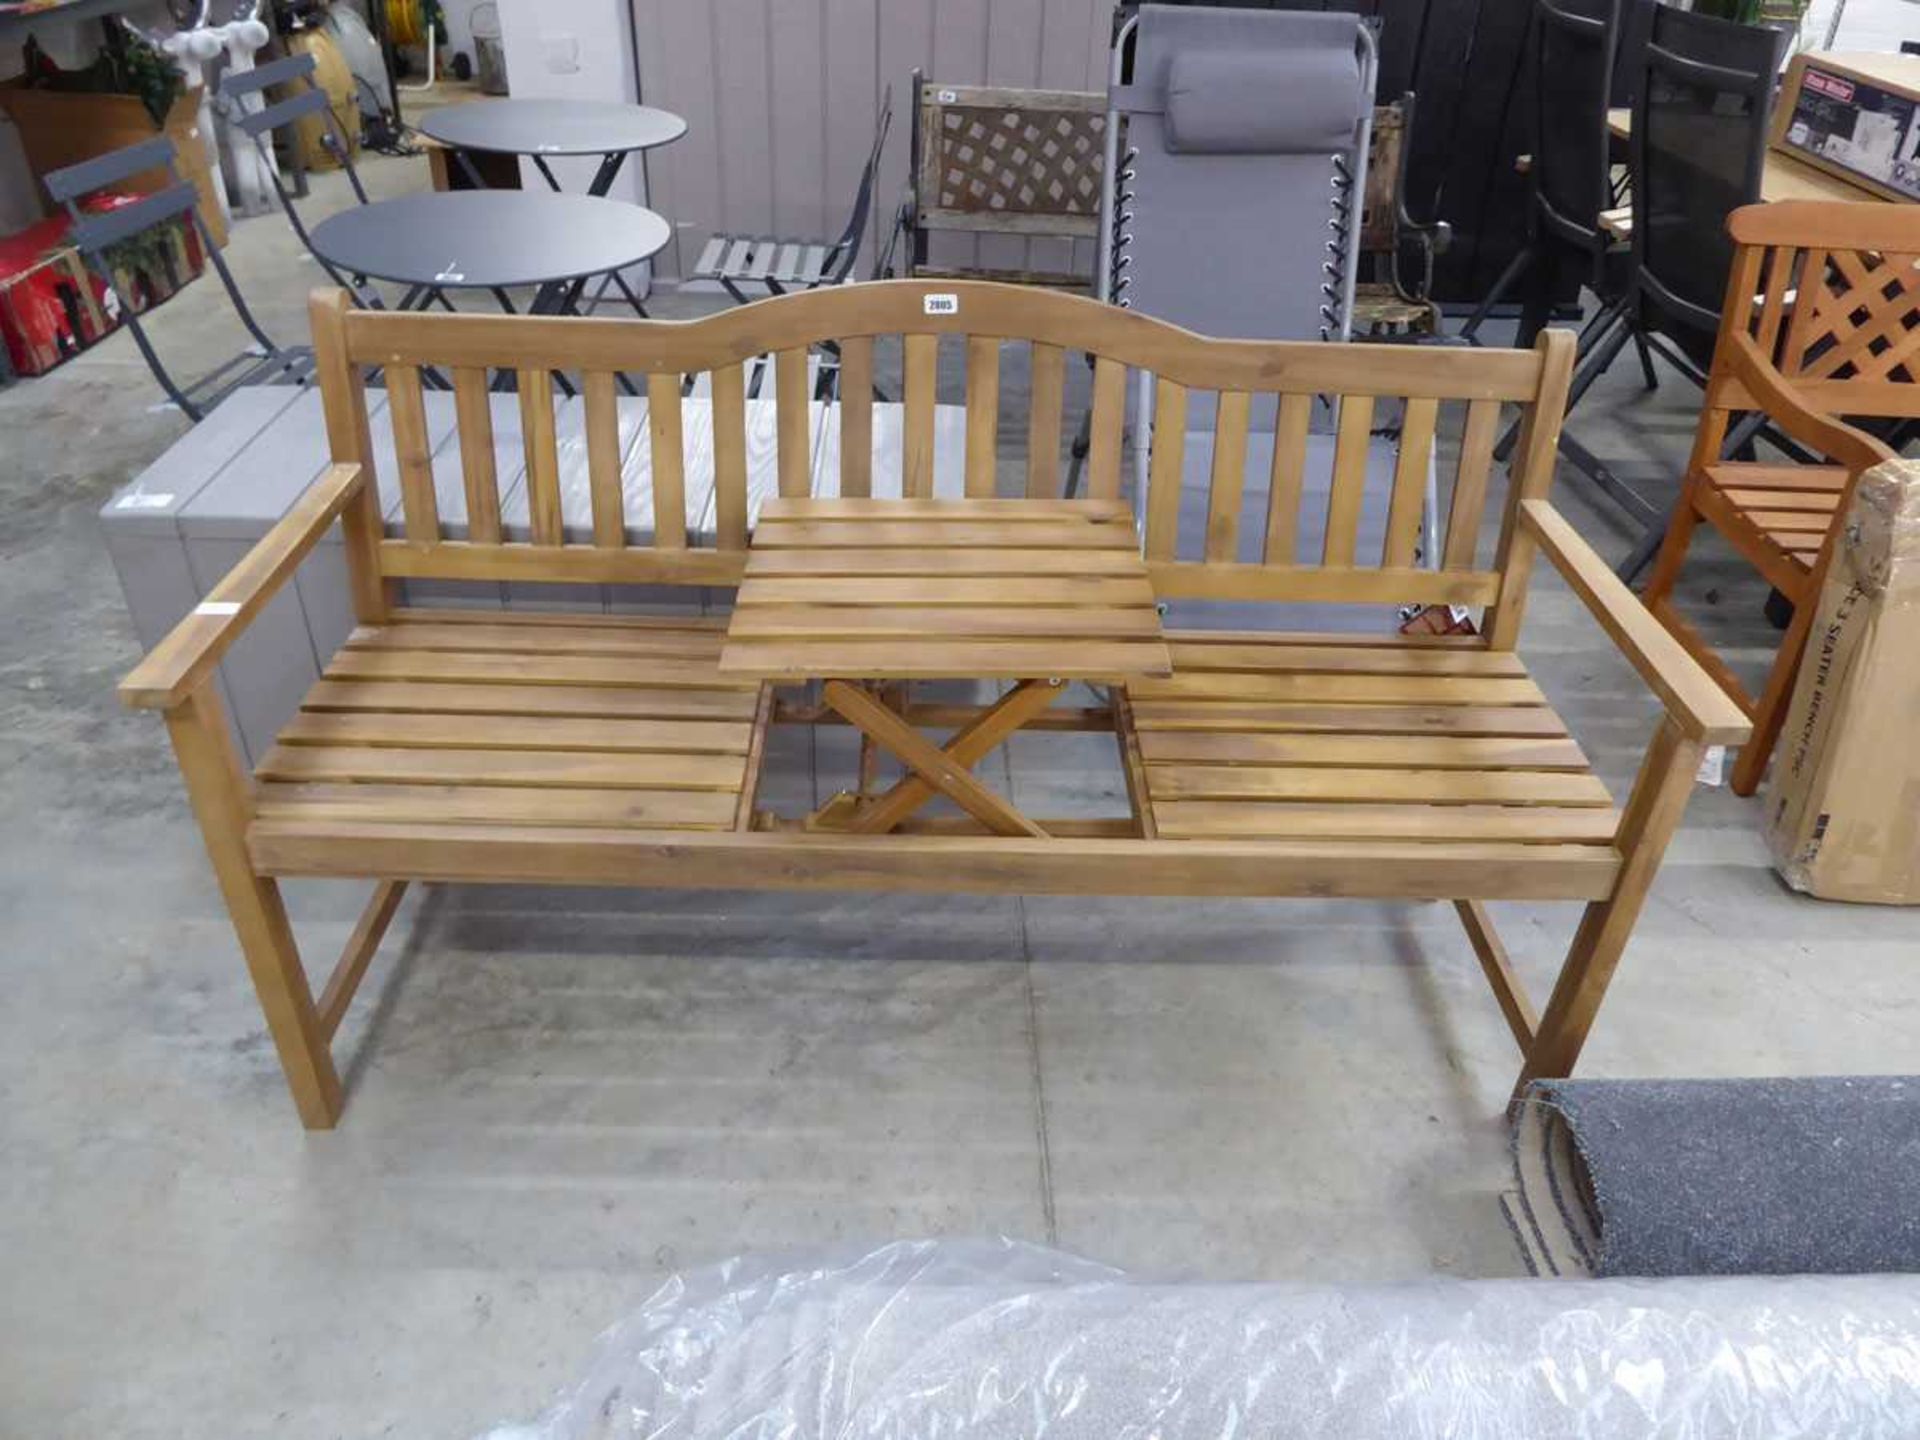 3 seater garden bench with fold up table - Image 2 of 2